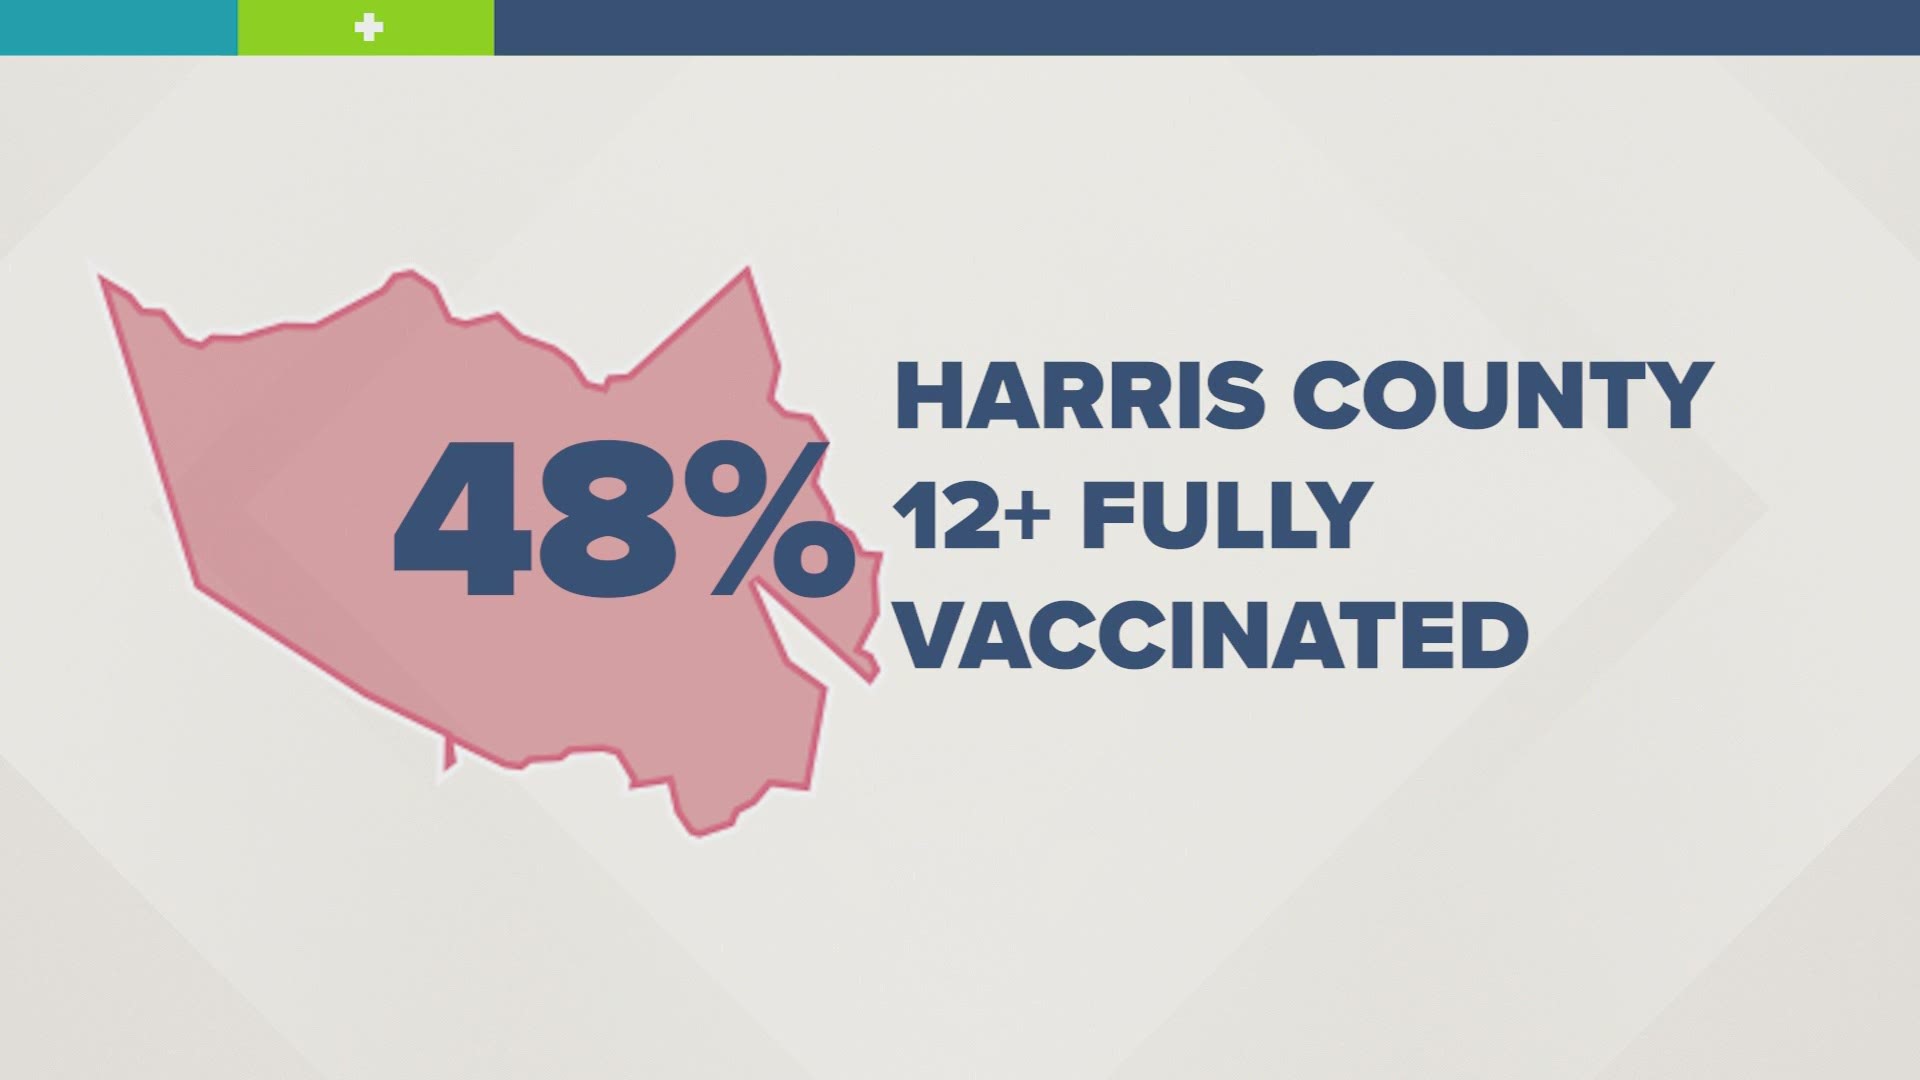 About 48% of the population 12 and older are fully vaccinated in Harris County.